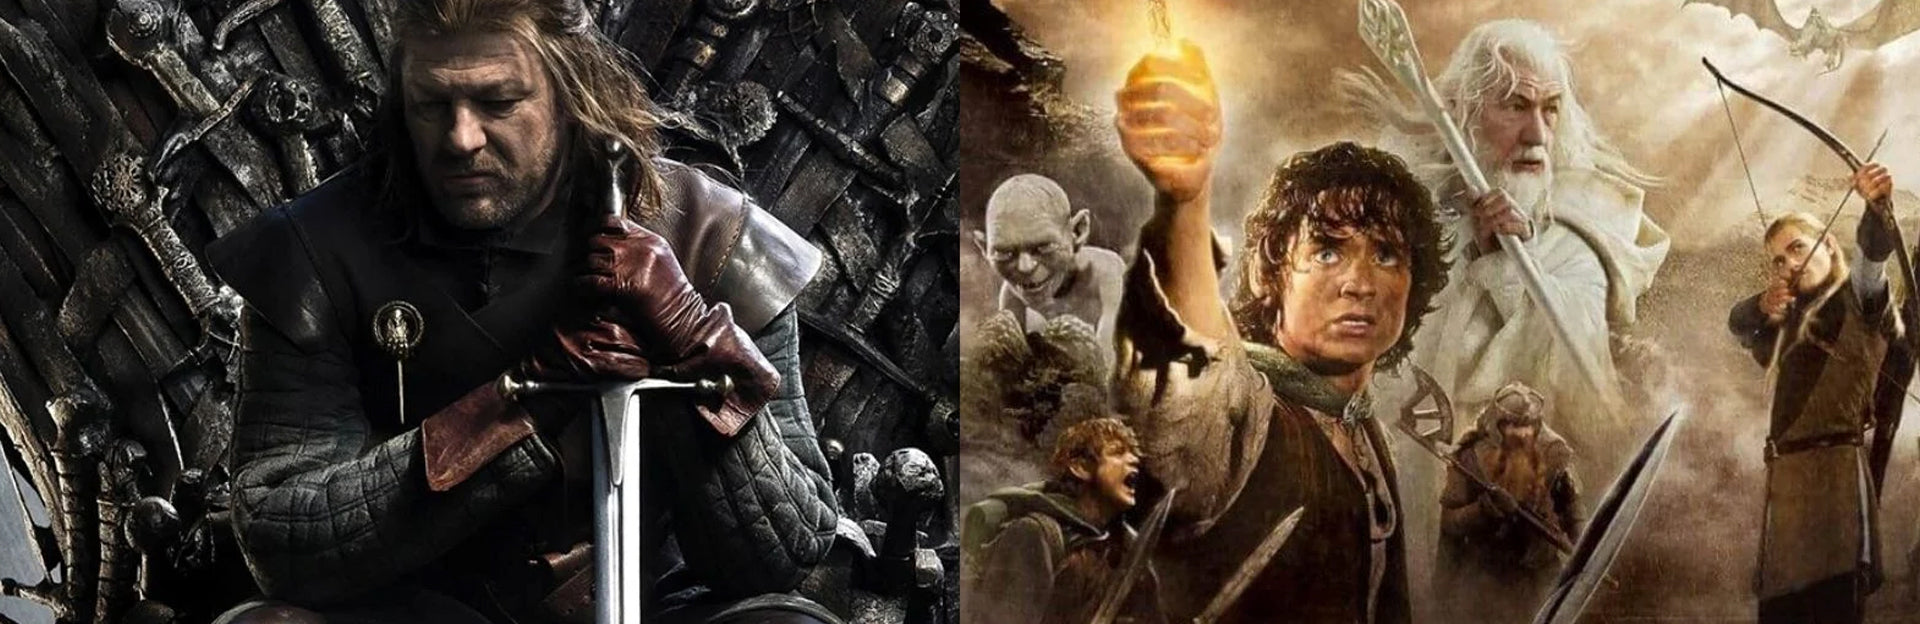 How The 'Harry Potter' And 'Lord Of The Rings' Movies Made Being A